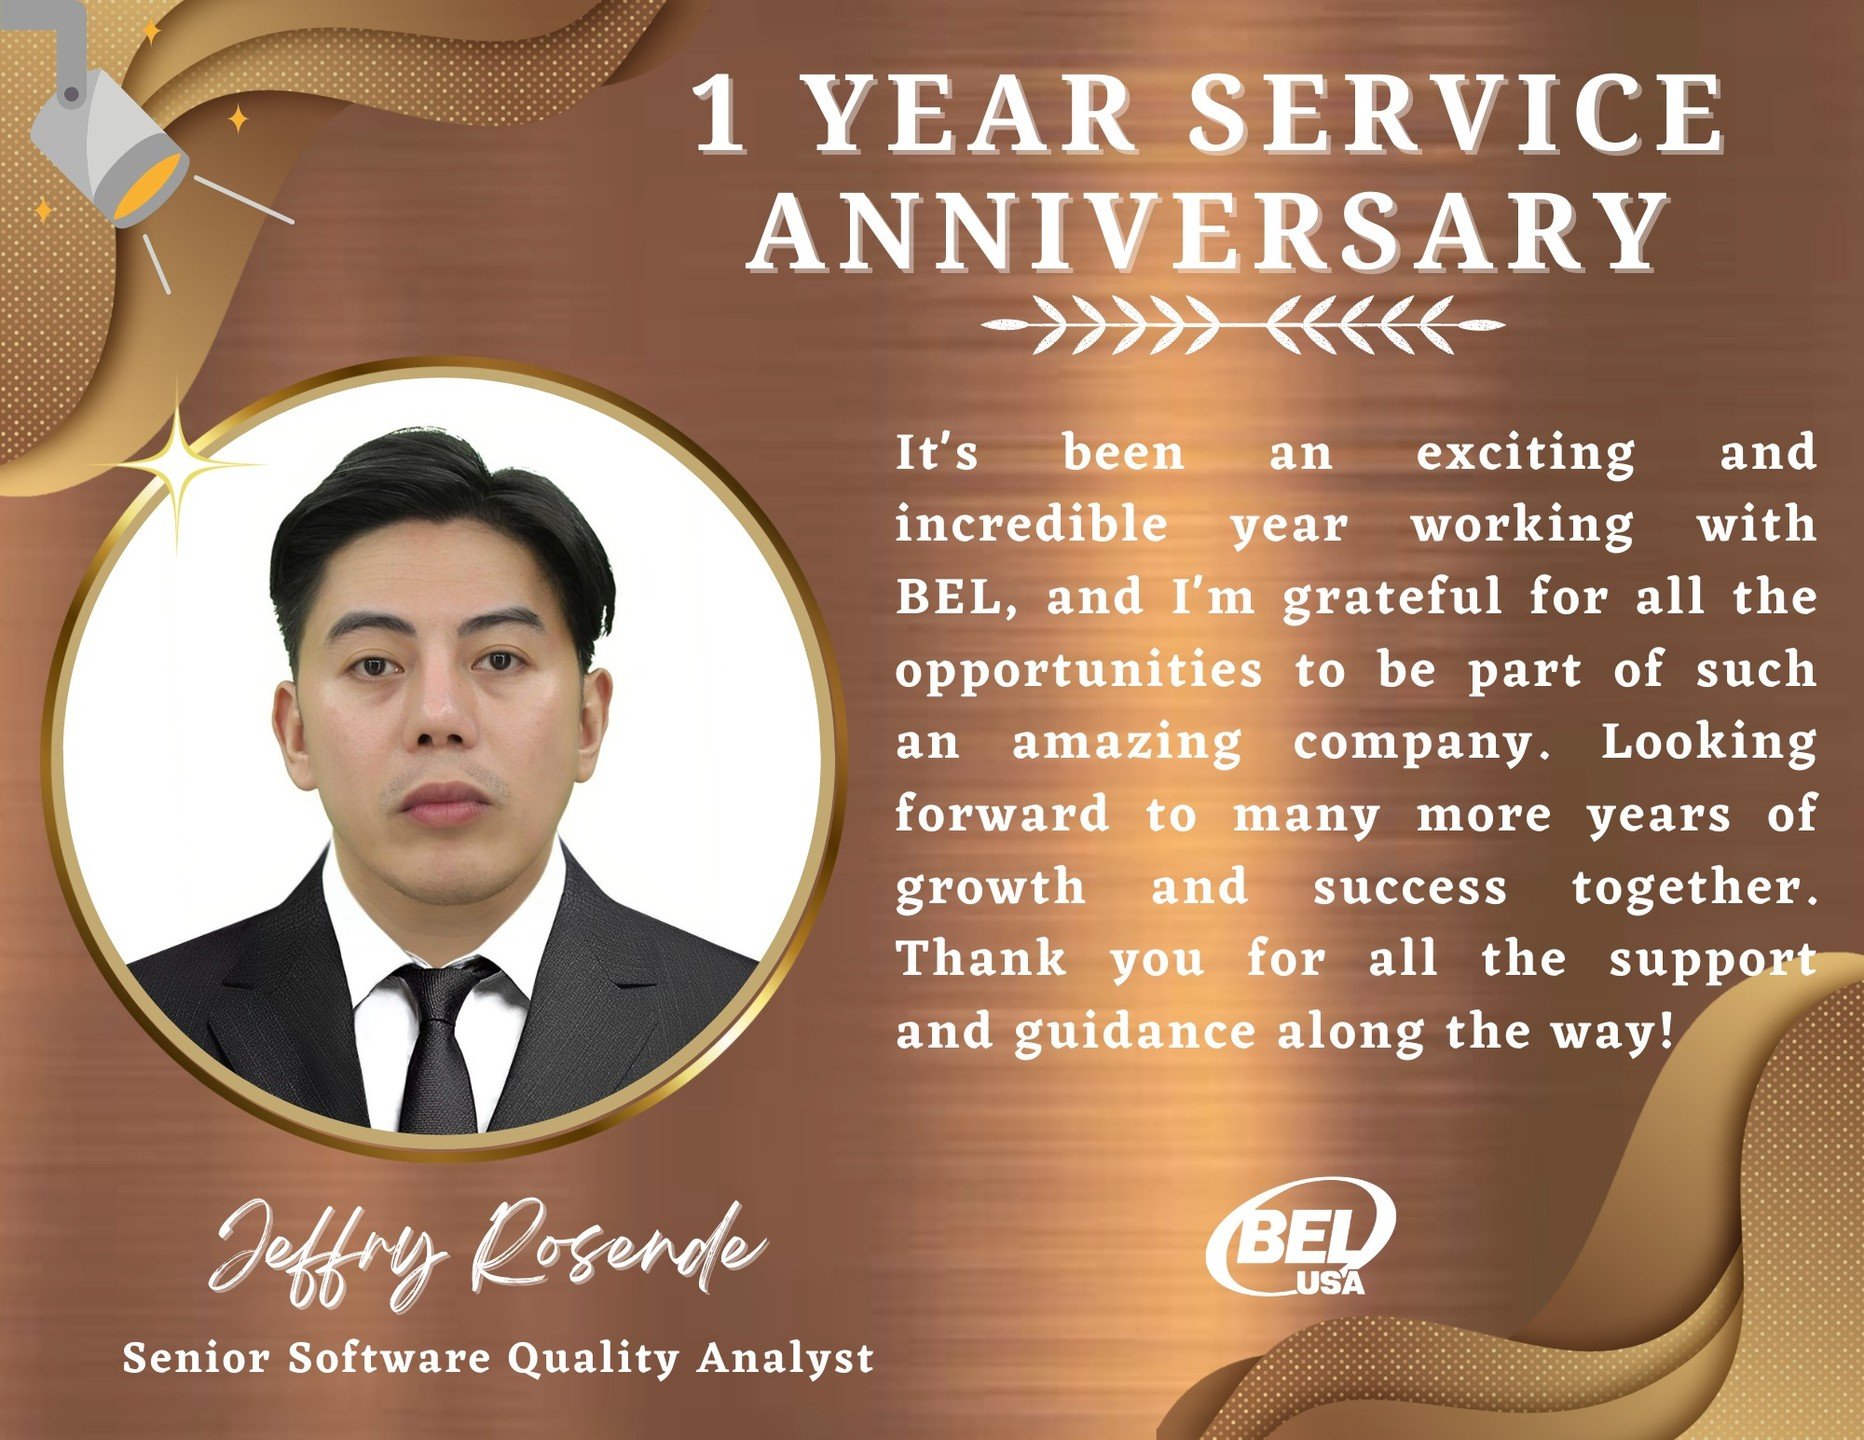 Join us in celebrating Jeffry Rosende&rsquo;s first anniversary at BEL. Over the past year, he has been an integral part of our team, demonstrating exceptional skill and dedication.

We are so grateful to have Jeffry with us and are excited about wha